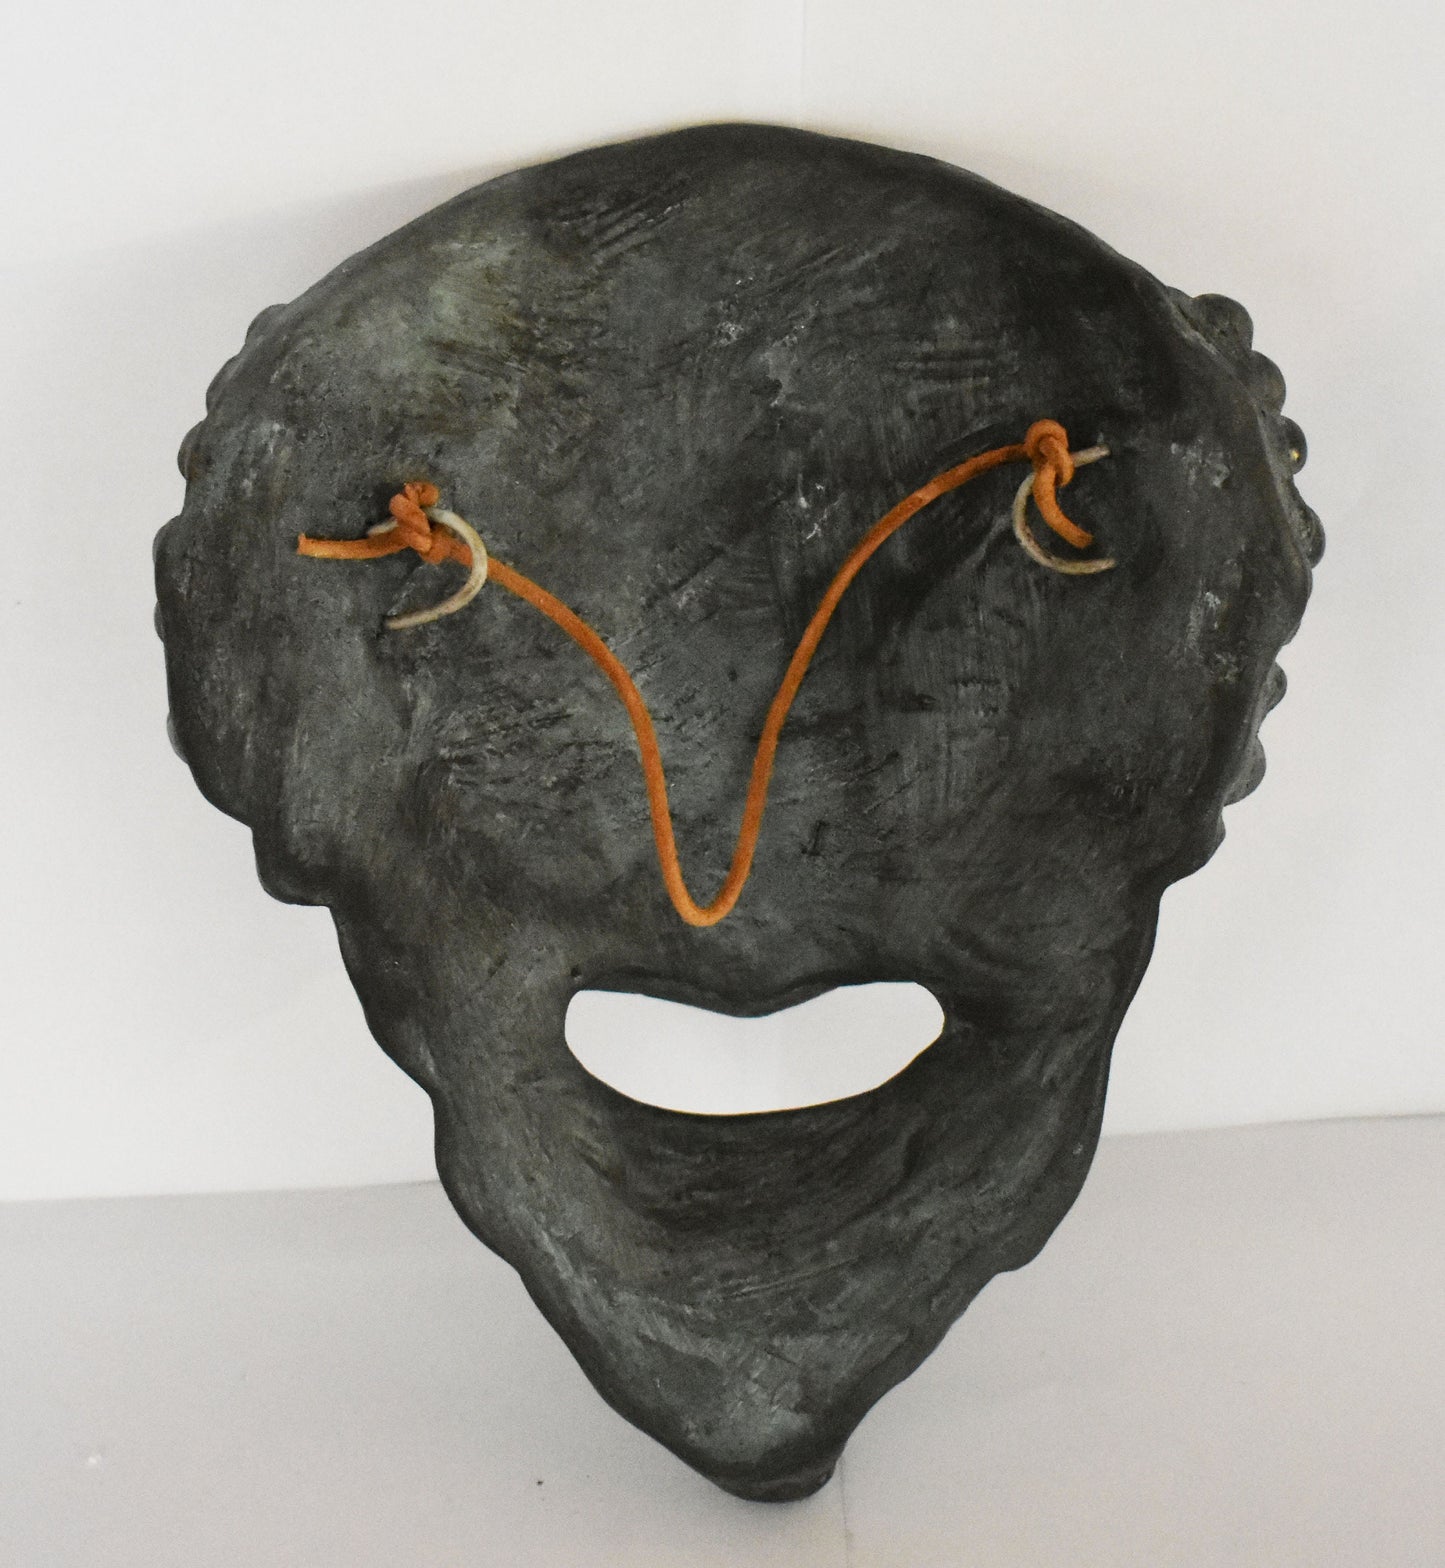 Dionysus Mask - Greek God of Wine, Fertility, Ritual Madness, Theater and Religious Ecstasy- Wall Decoration - Bronze Colour Effect